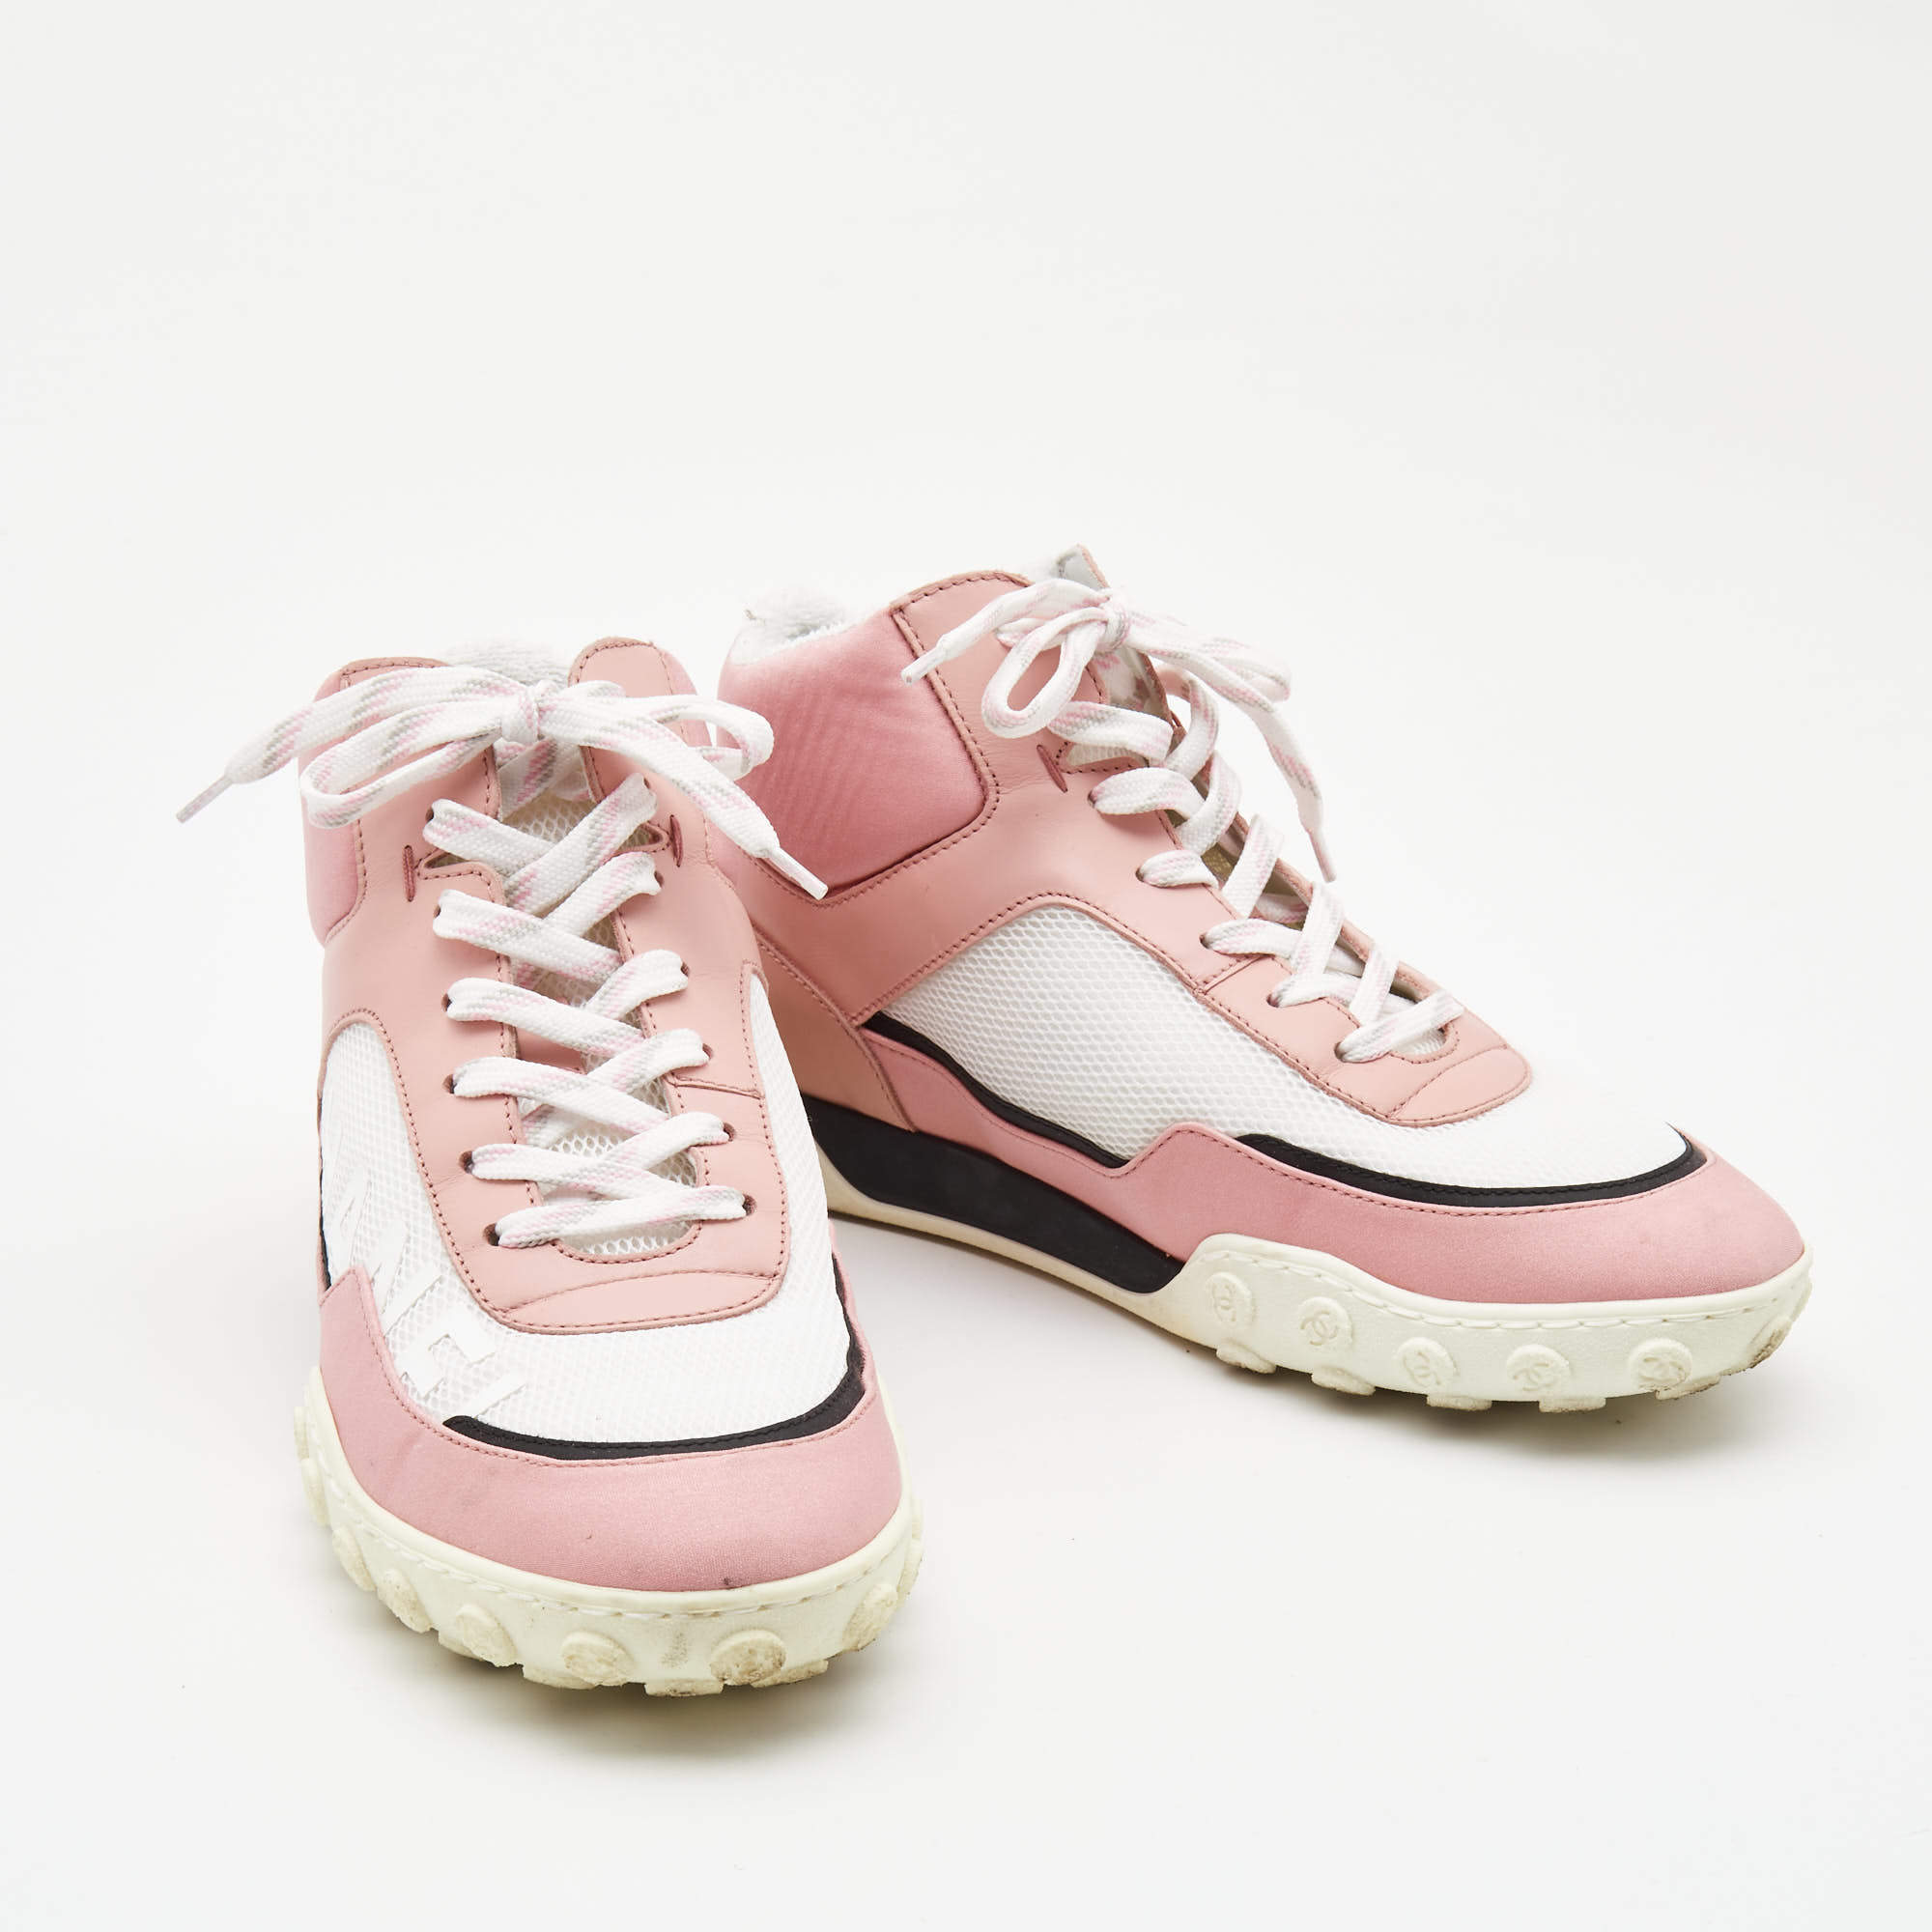 Chanel Pink/White Fabric and Mesh CC High Top Sneakers Size 37.5 Chanel